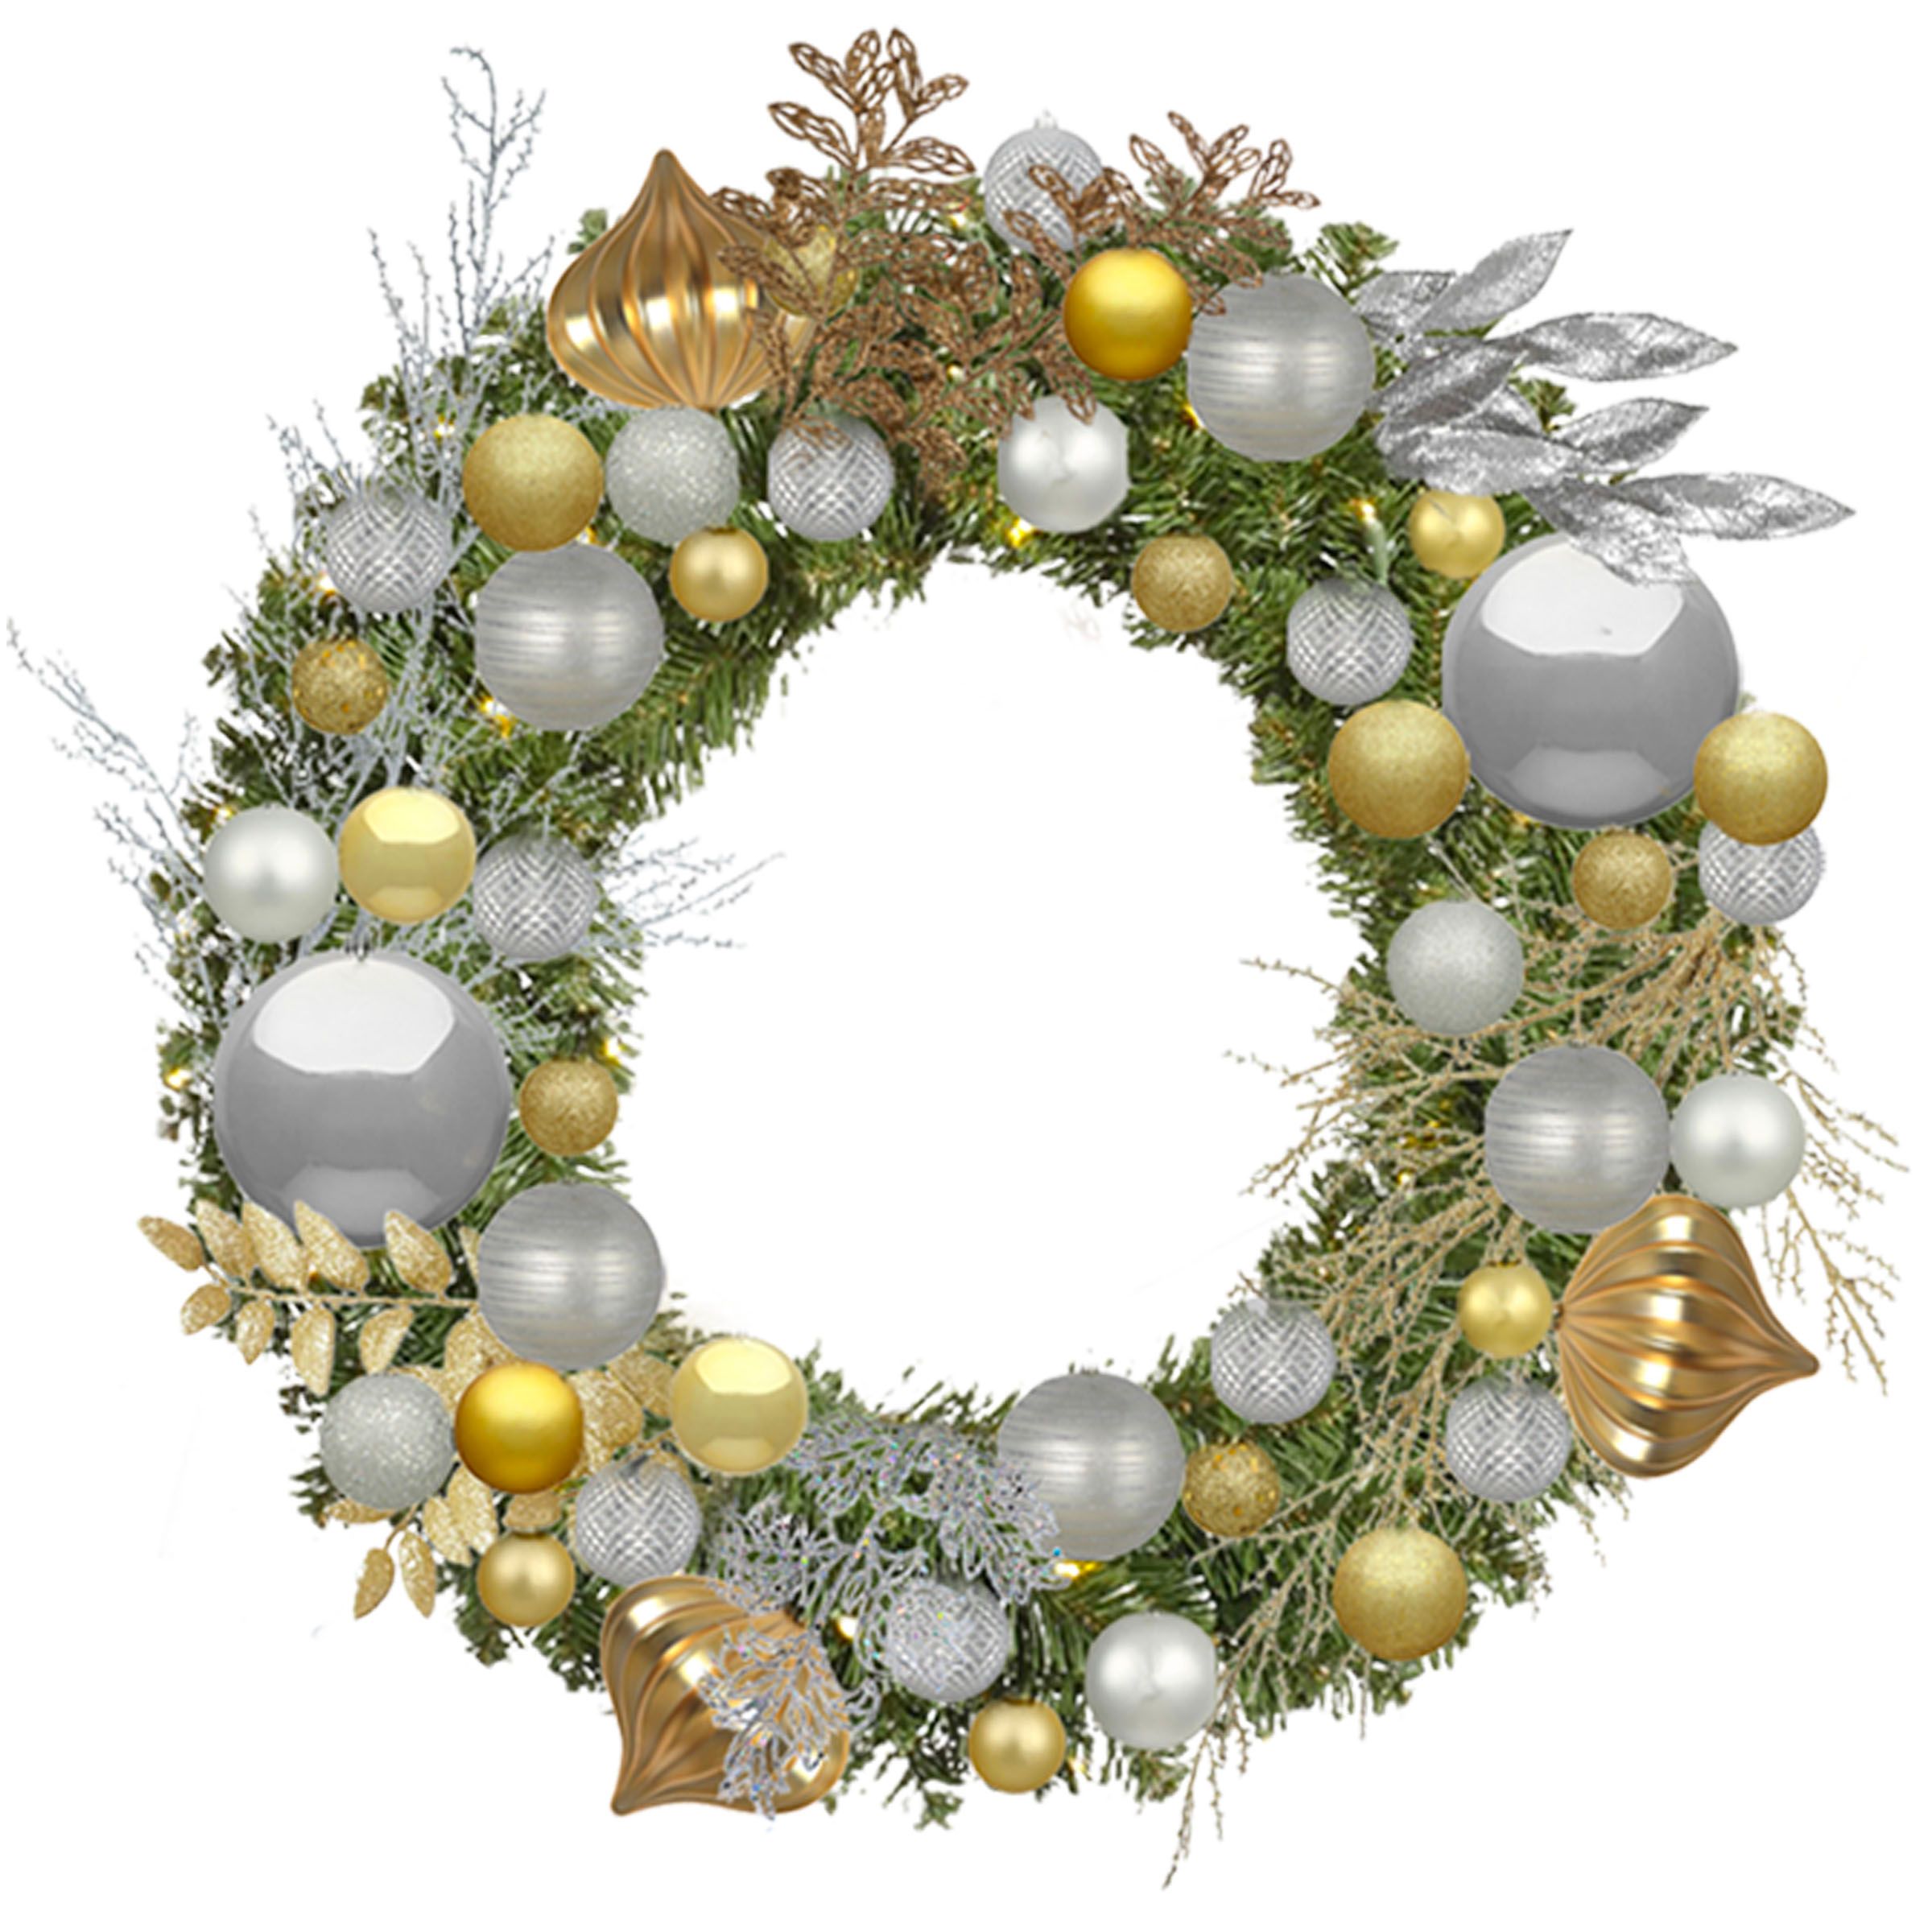 Gold & silver pre-decorated Christmas wreath